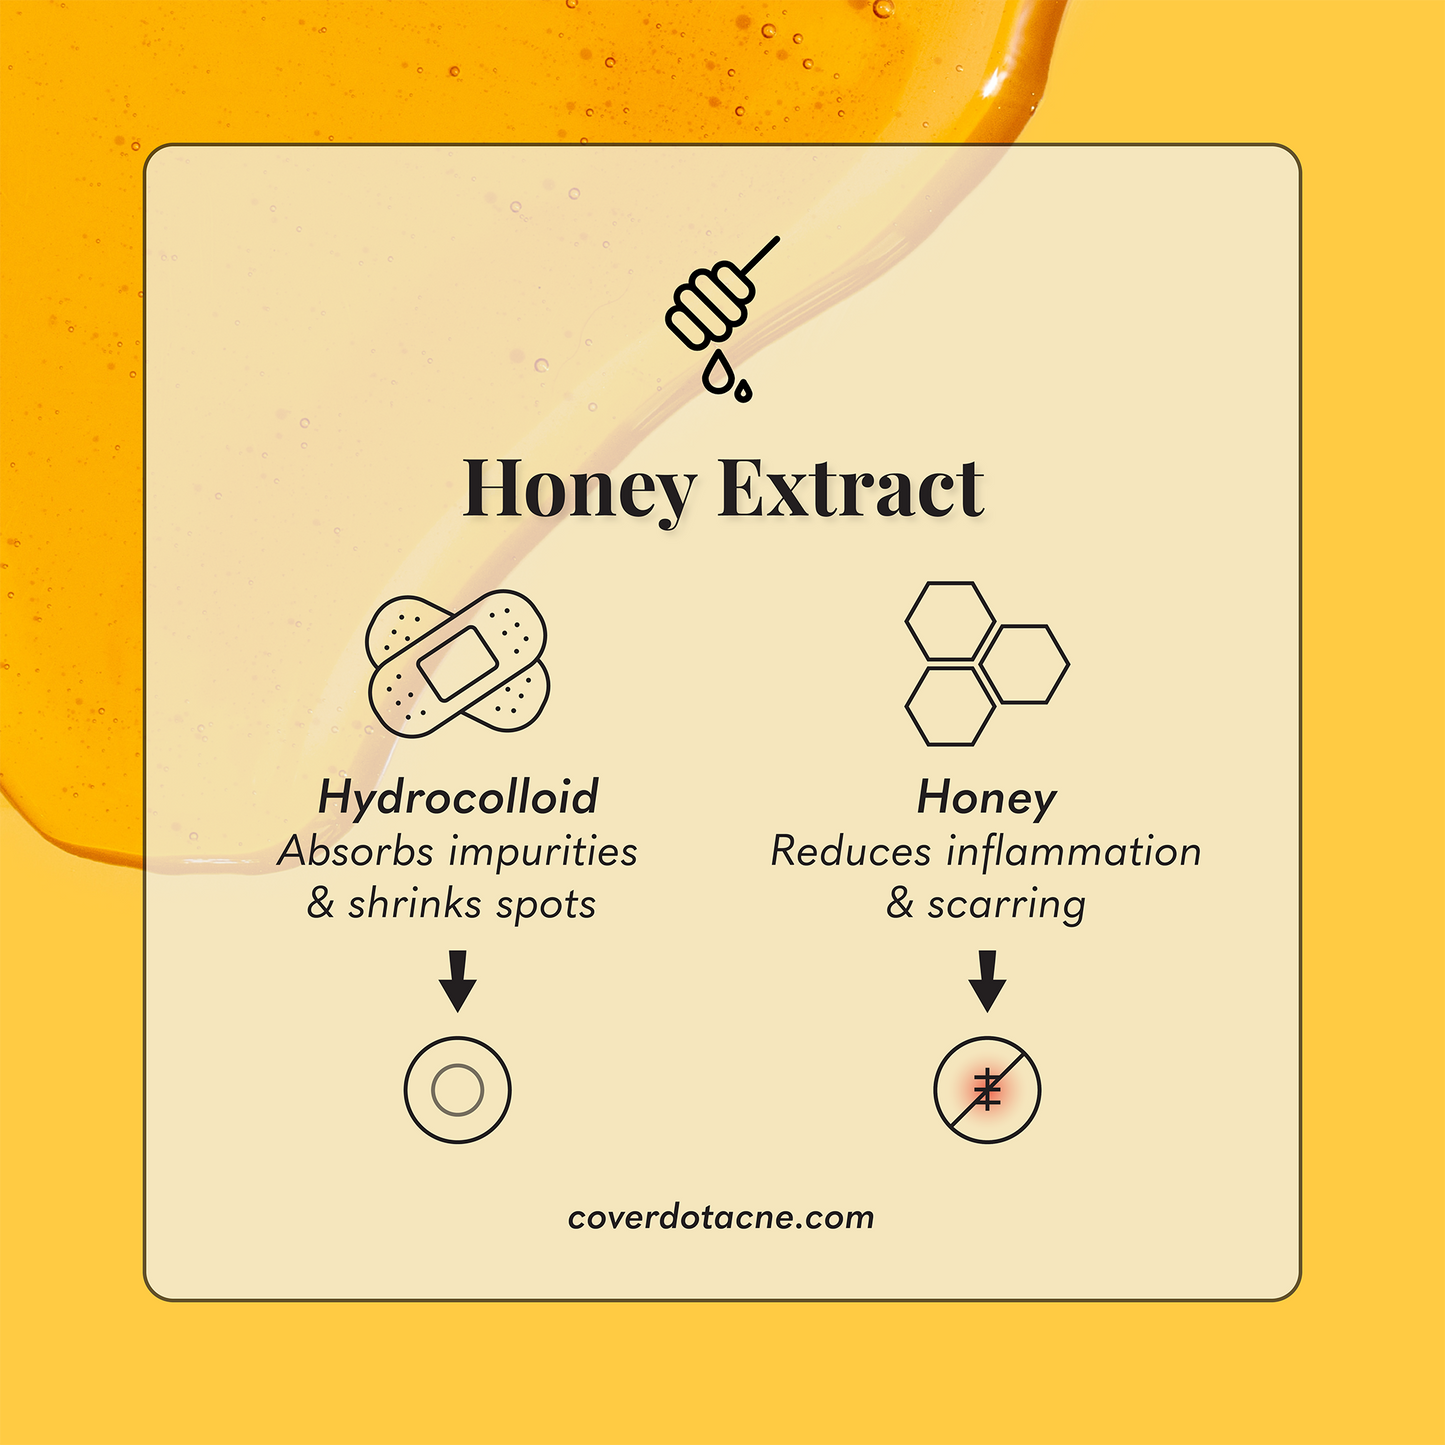 honey acne patch description reduces inflammation and scarring 48 dots